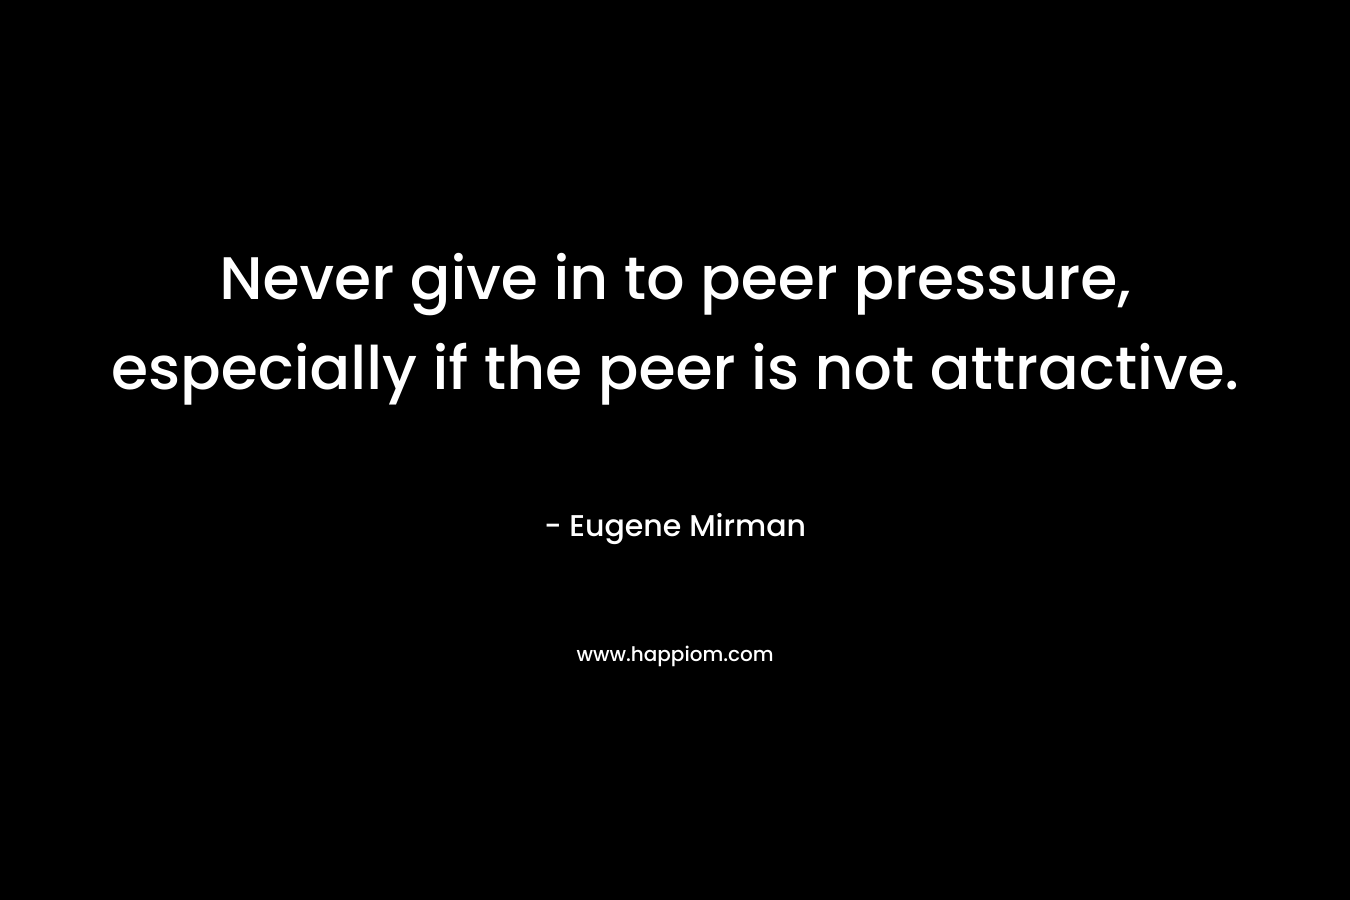 Never give in to peer pressure, especially if the peer is not attractive. – Eugene Mirman